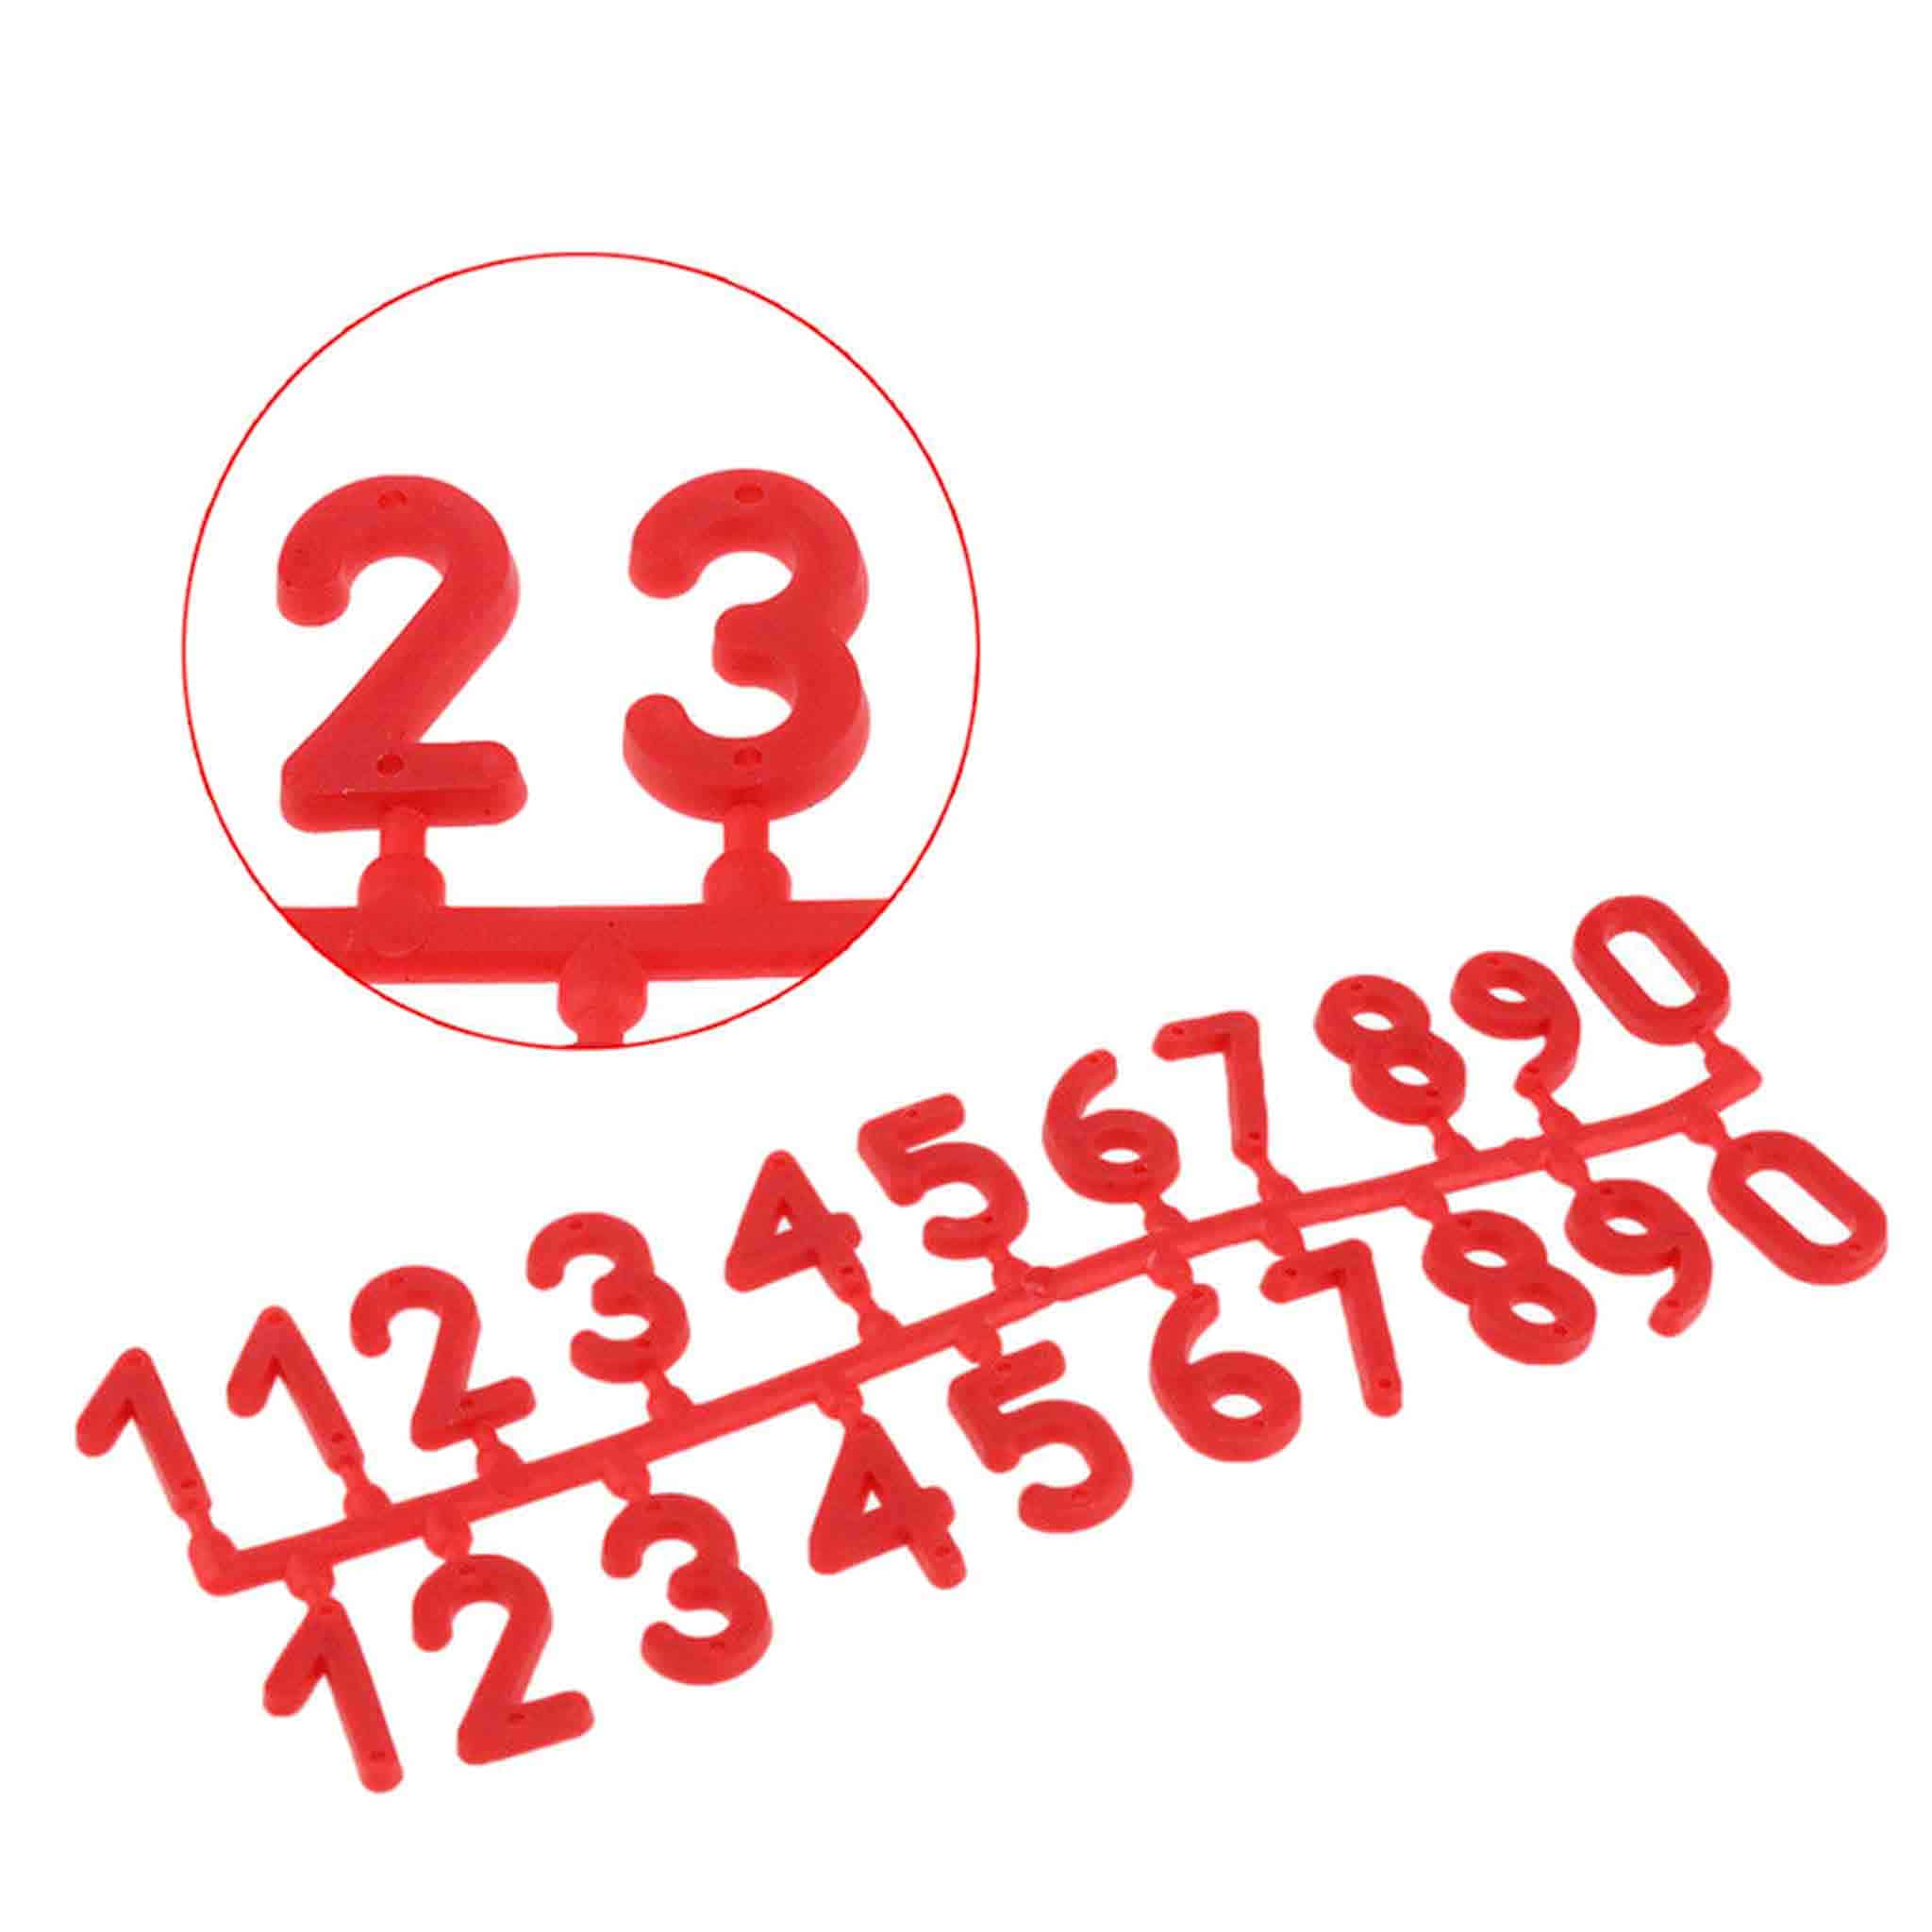 Bee Hive Red Numbers for Labelling your Hive - Accessories collection by Buzzbee Beekeeping Supplies